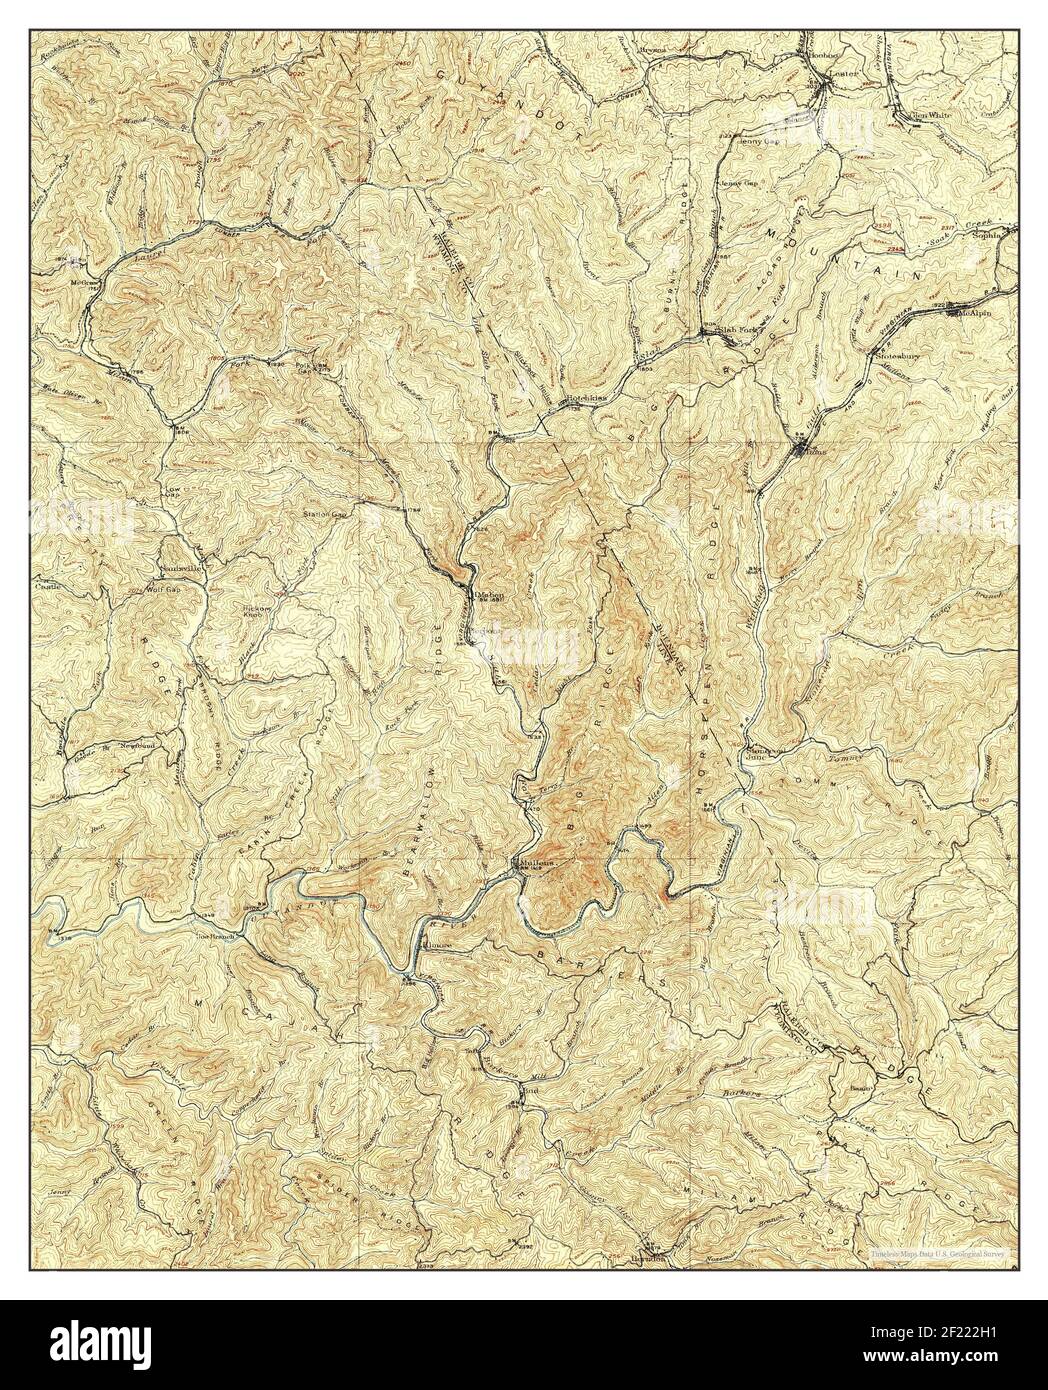 Mullens, West Virginia, map 1912, 1:62500, United States of America by Timeless Maps, data U.S. Geological Survey Stock Photo